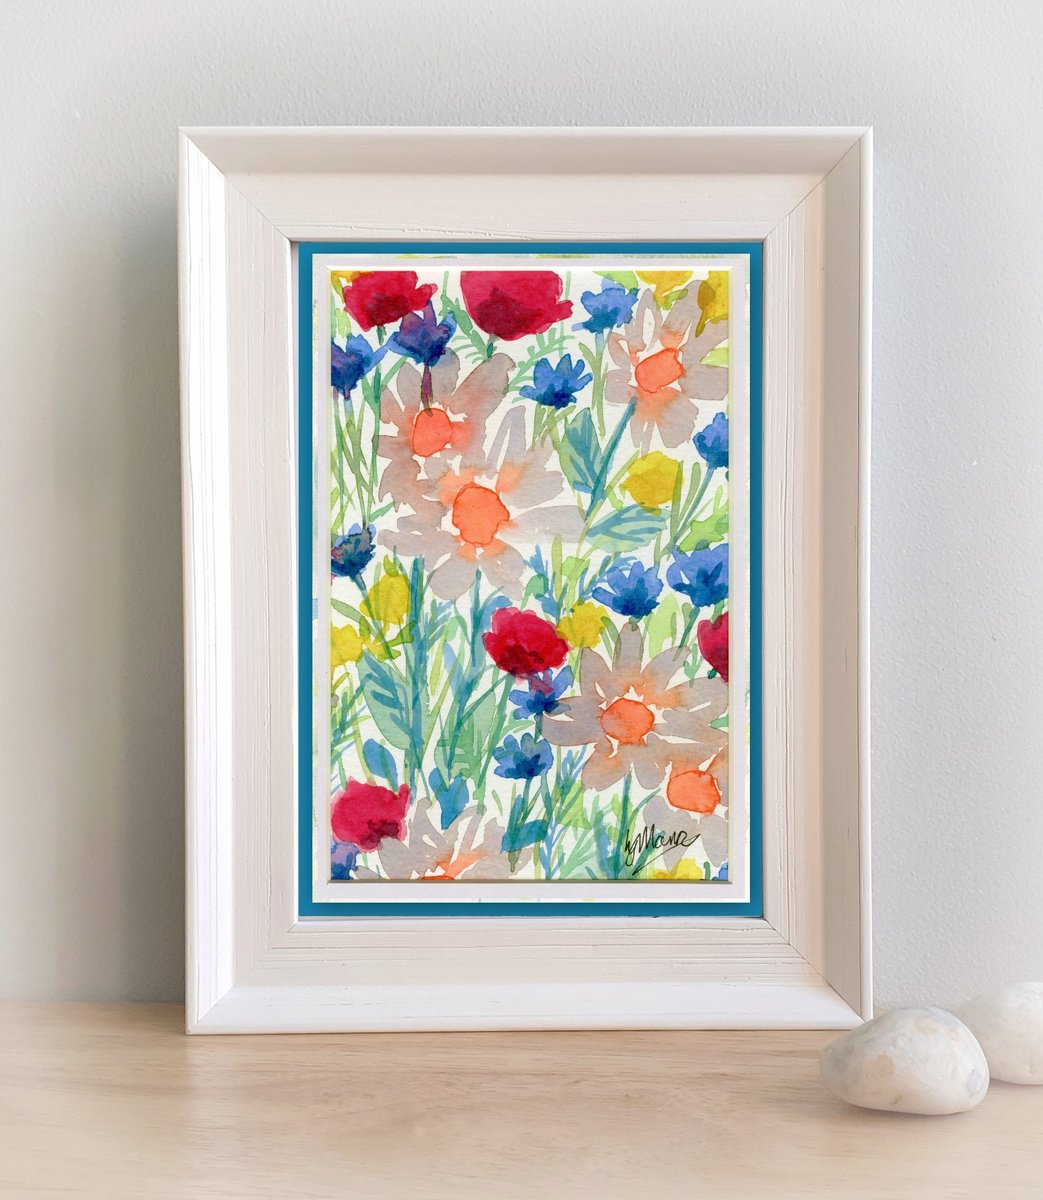 Simply Flowers 1 - mounted watercolour, small gift idea by Lisa Mann